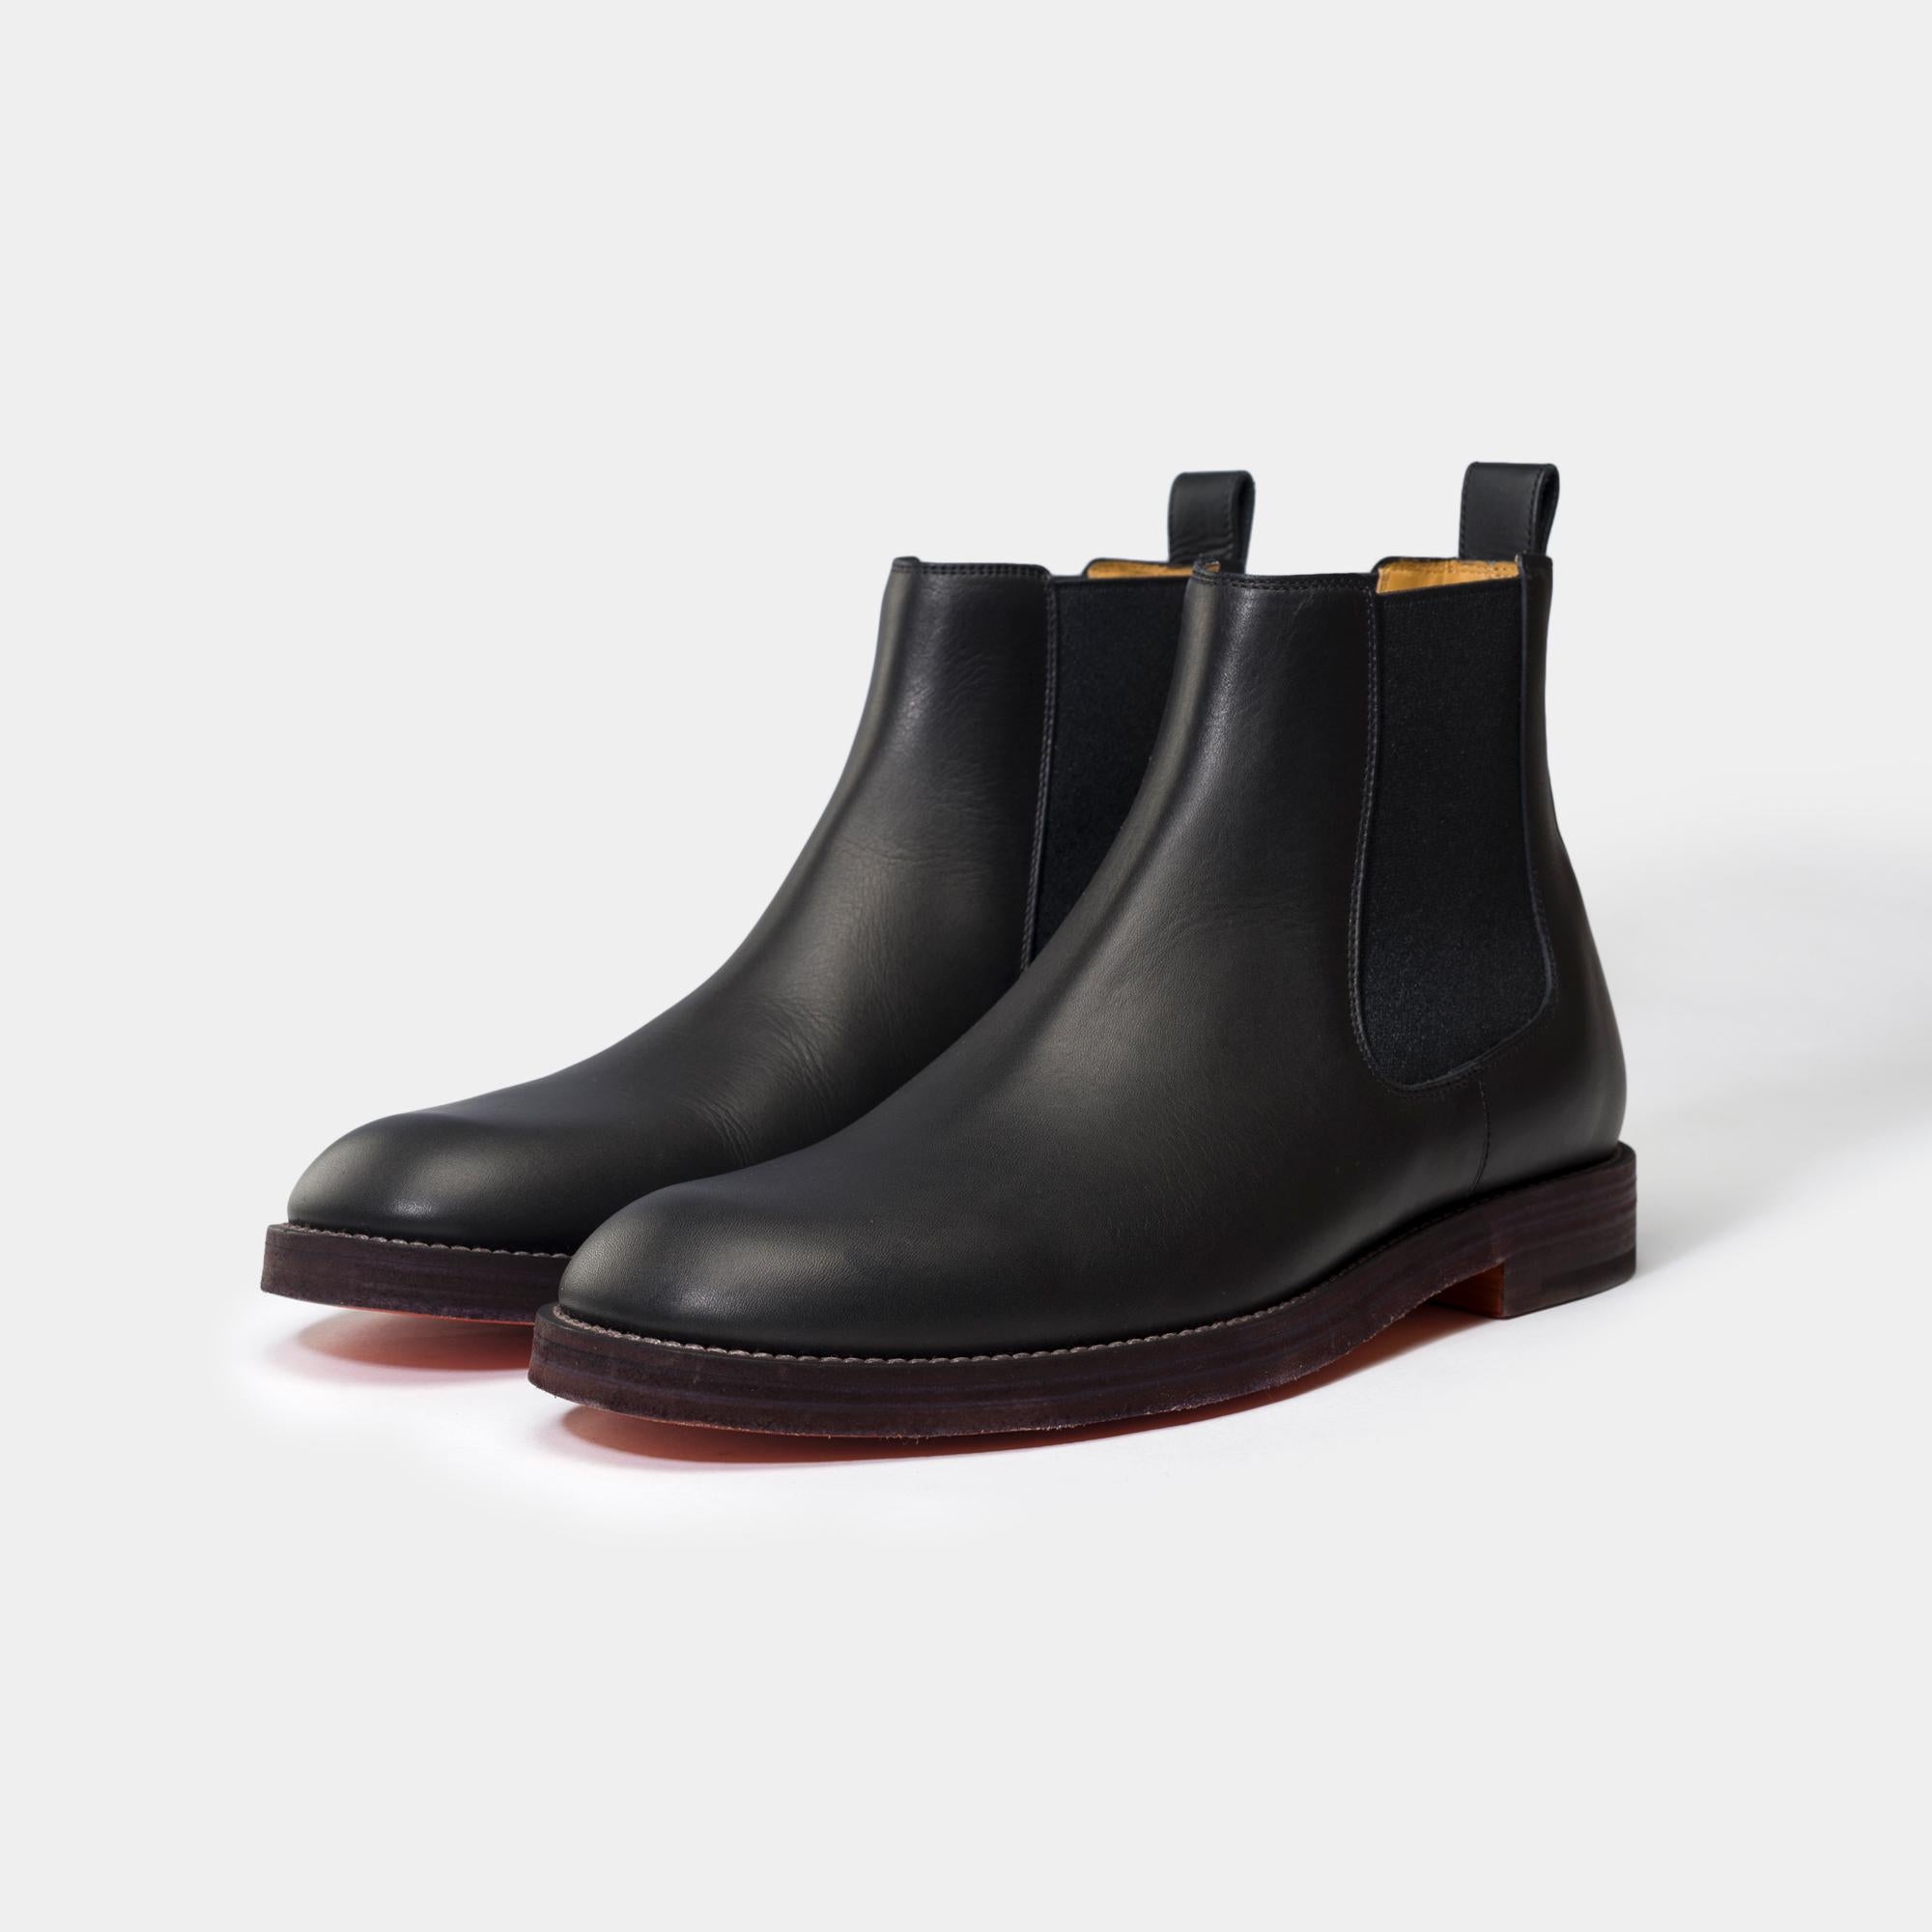 Beautiful​ ​Hermès​ ​boots​ ​for​ ​men​ ​in​ ​black​ ​calf​ ​leather,​ ​leather​ ​soles
Signature:​ ​